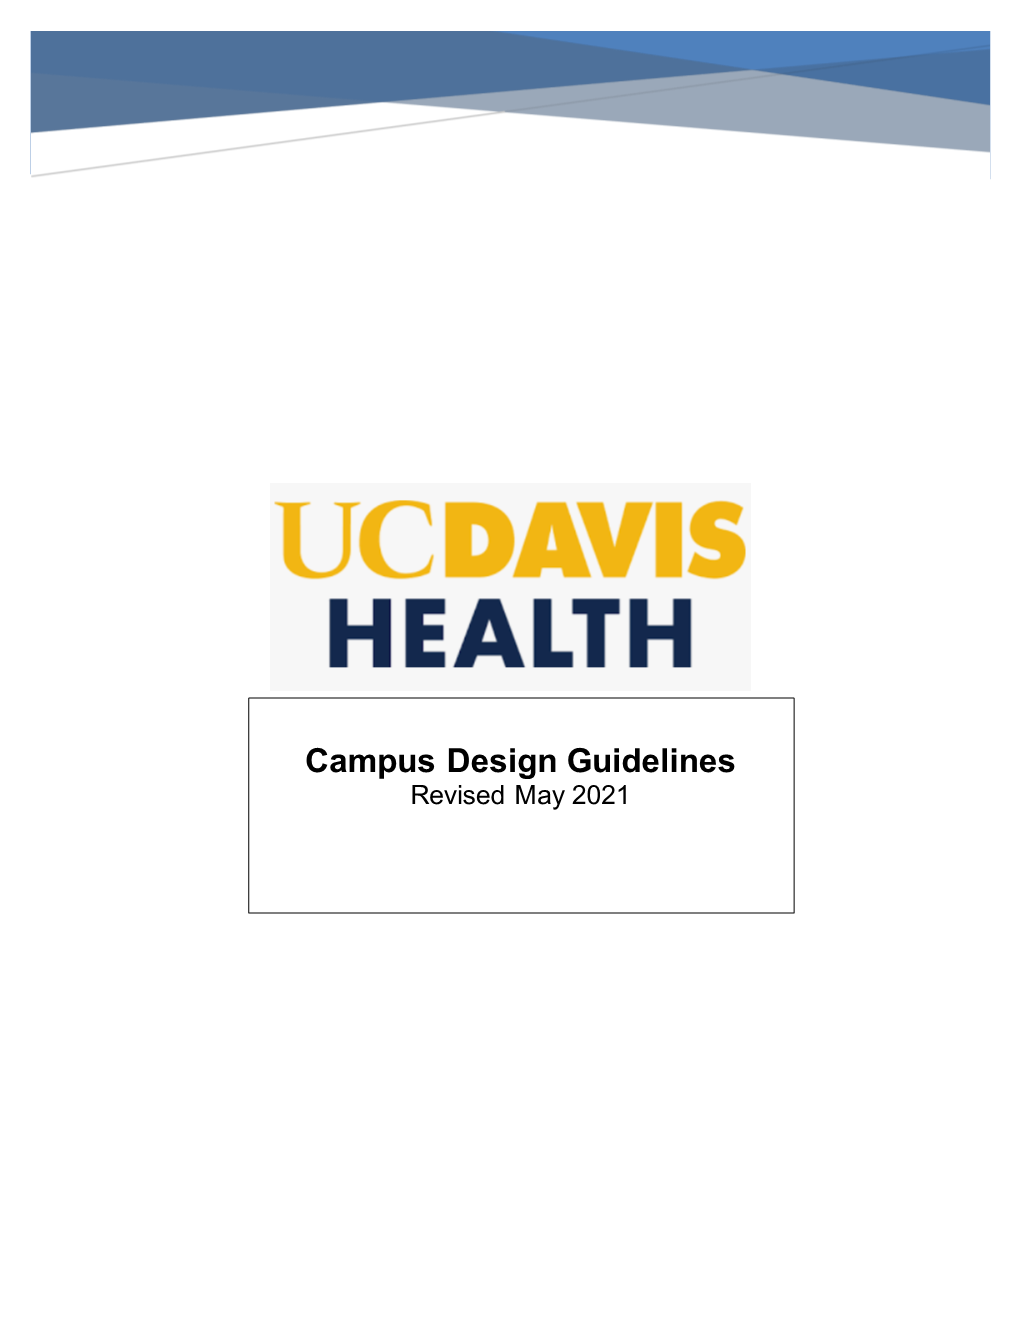 Campus Design Guidelines Revised May 2021